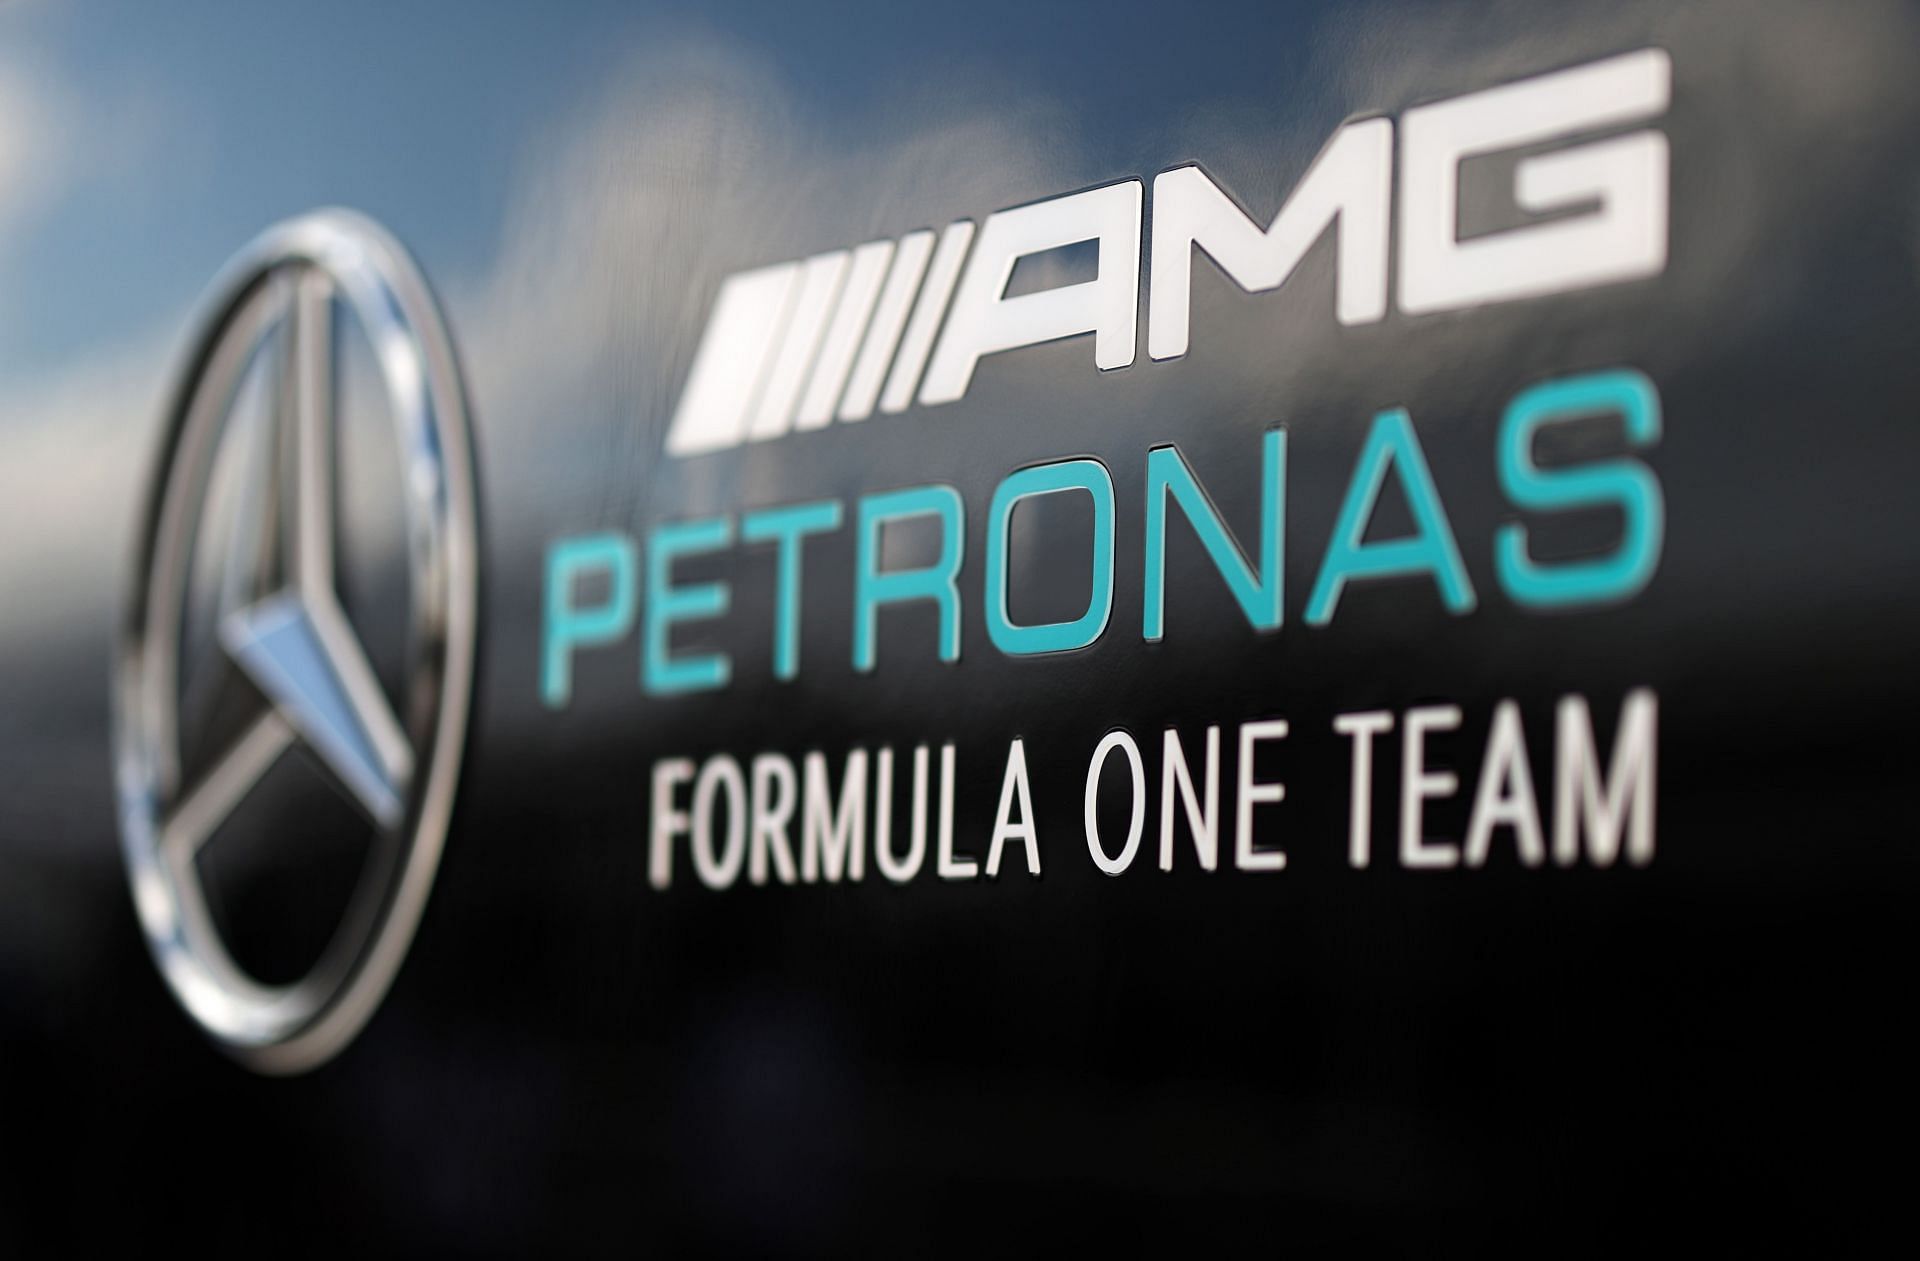 The Mercedes team&#039;s logo in the F1 Paddock (Photo by Chris Graythen/Getty Images)